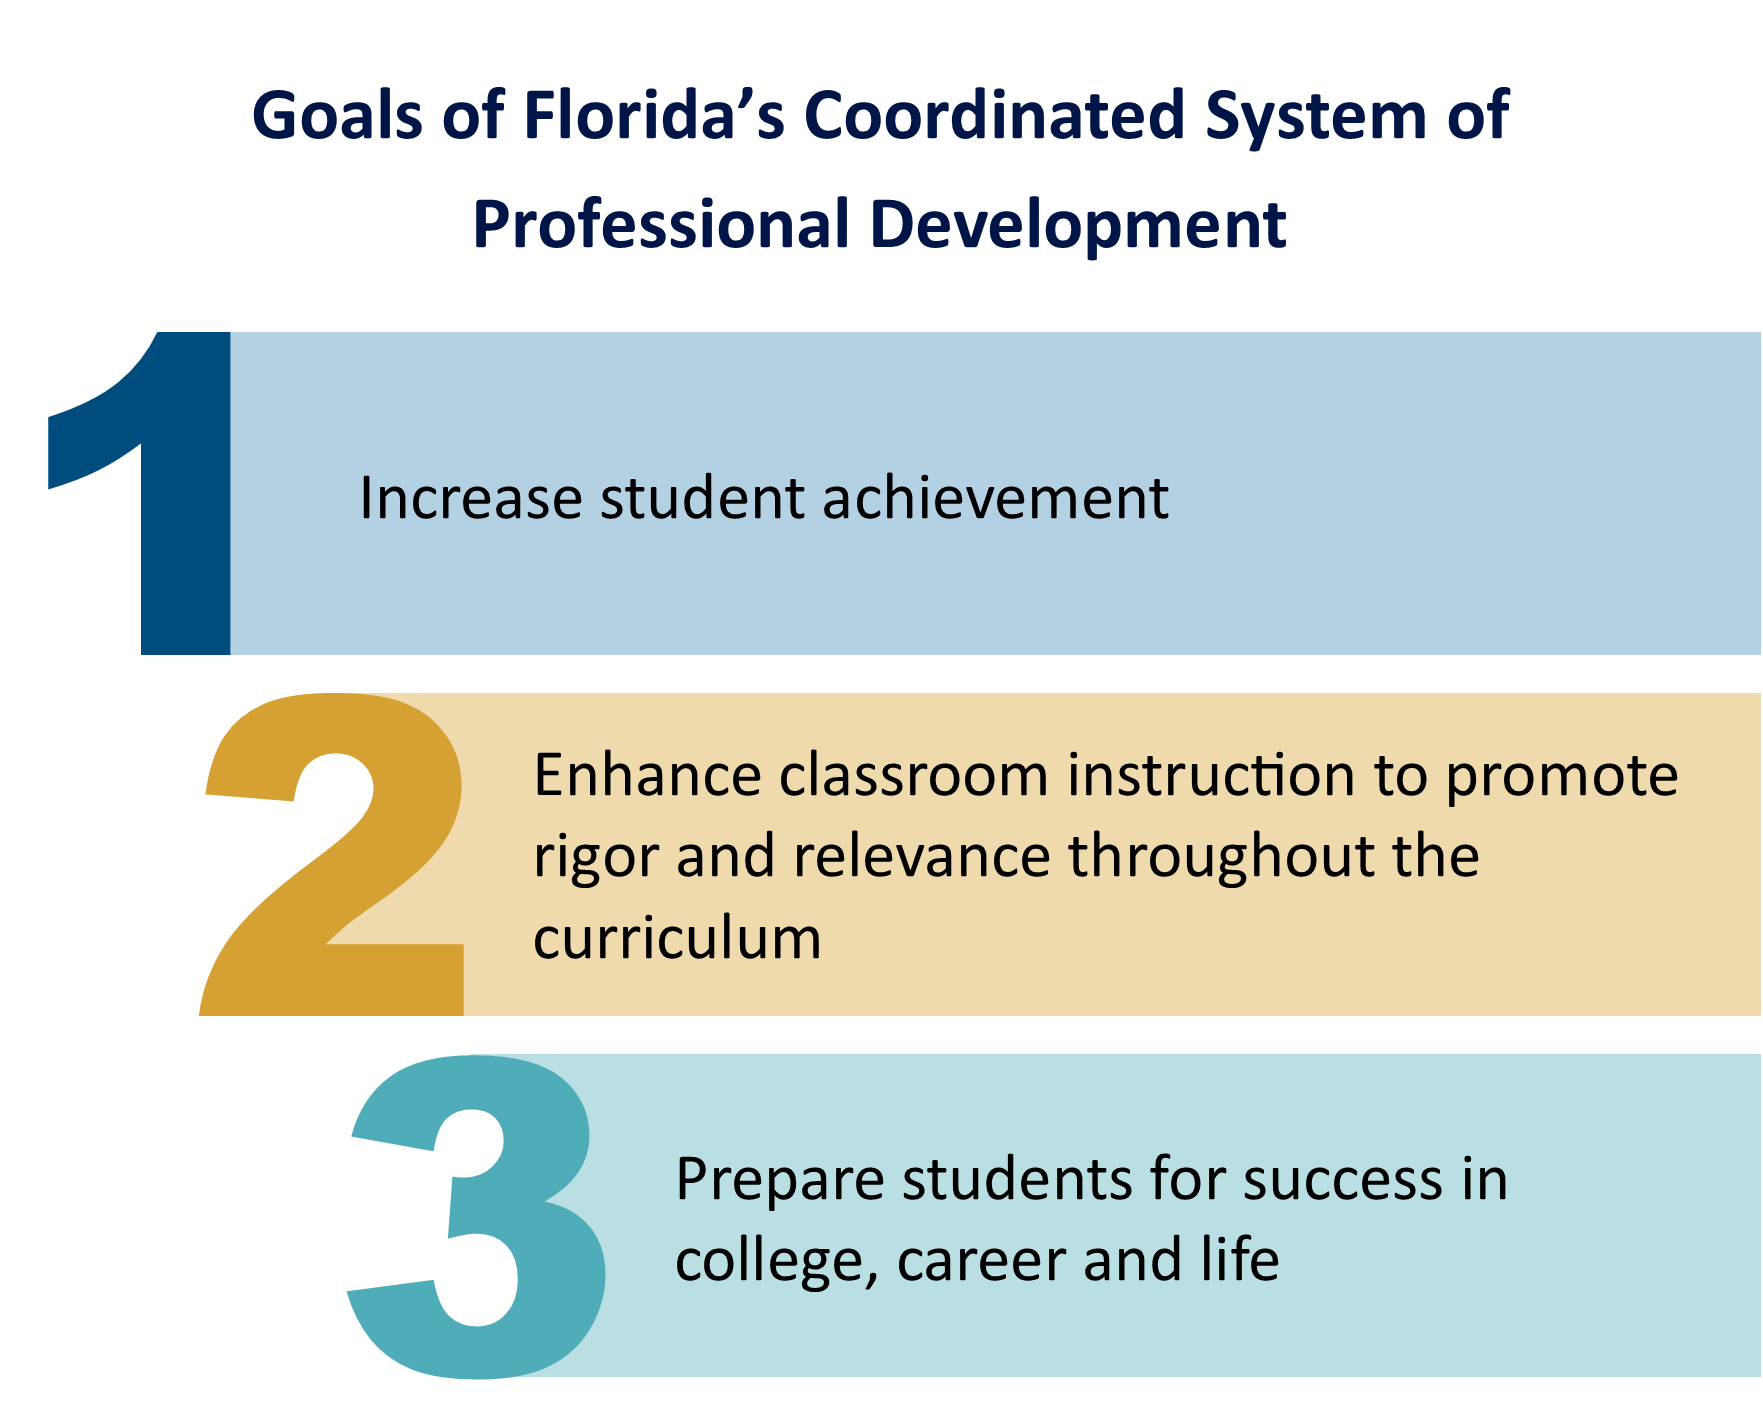 Goals of Florida’s Coordinated System of Professional Development. One is increase student achievement. Two is enhance classroom instruction to promote rigor and relevance throughout the curriculum. Three is prepare students for success in college, career, and life.